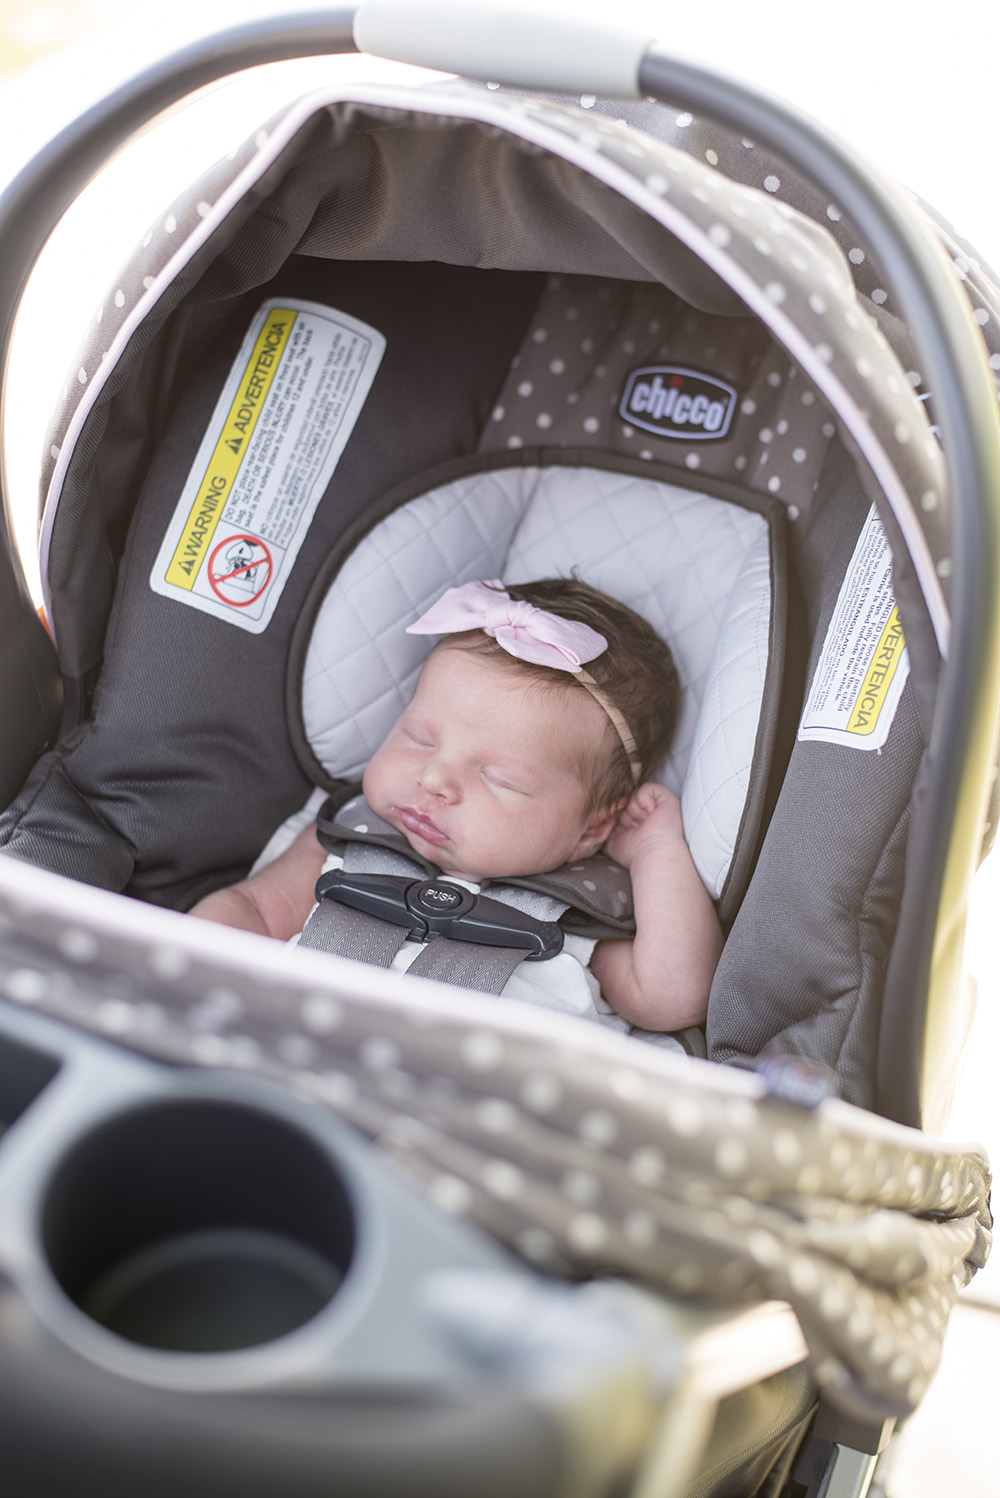 Looking for The best lightweight travel system? Chicco Bravo Trio is what you need! 